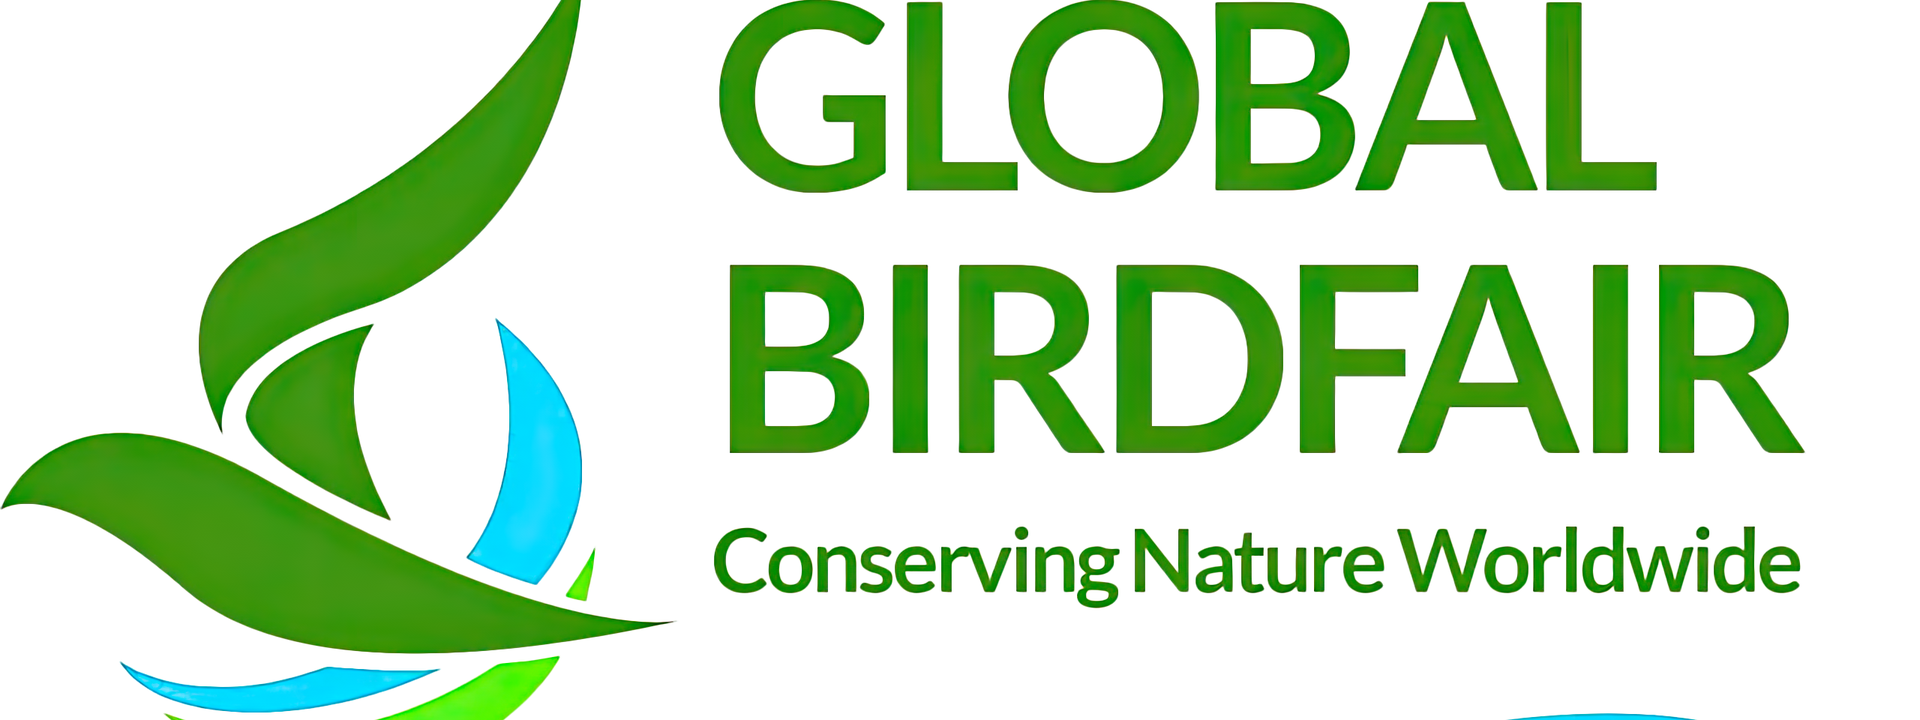 https://wildwings-com.s3.amazonaws.com/images/Birdfair_Logo_white.993678d8.fill-1920x720.png